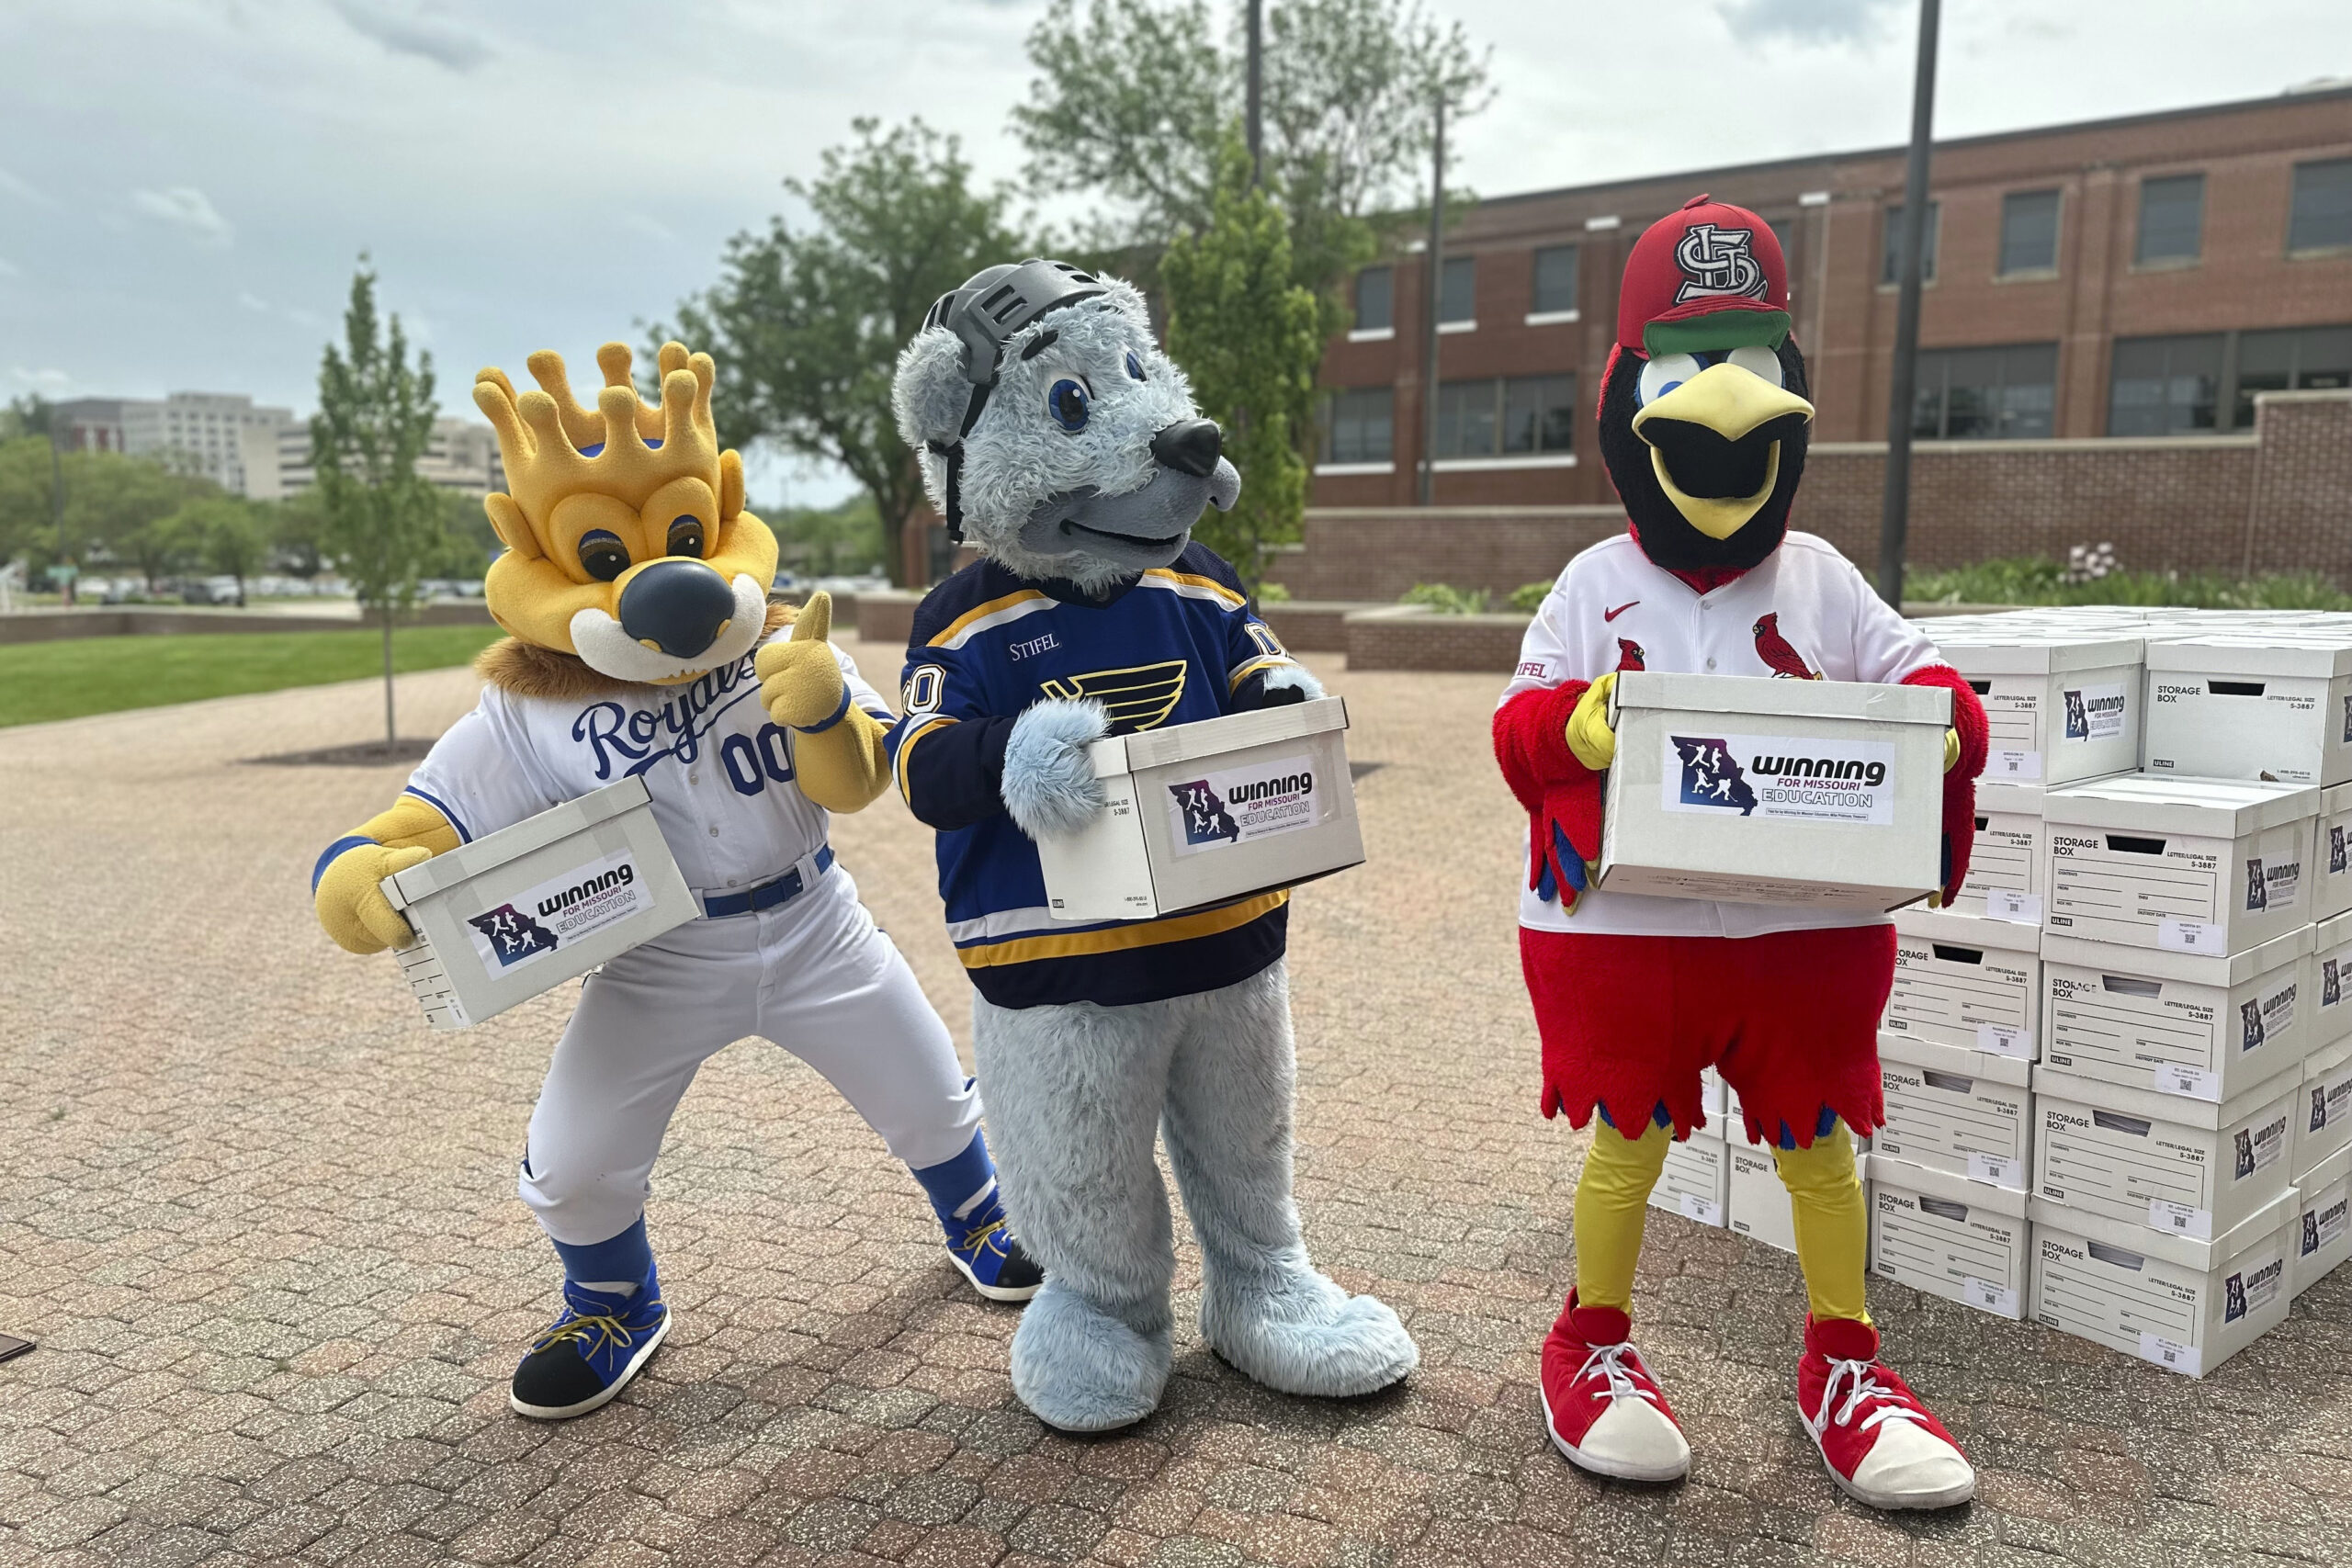 Campaign to legalize sports betting in Missouri gets help from mascots to haul voter signatures – Newstalk KZRG